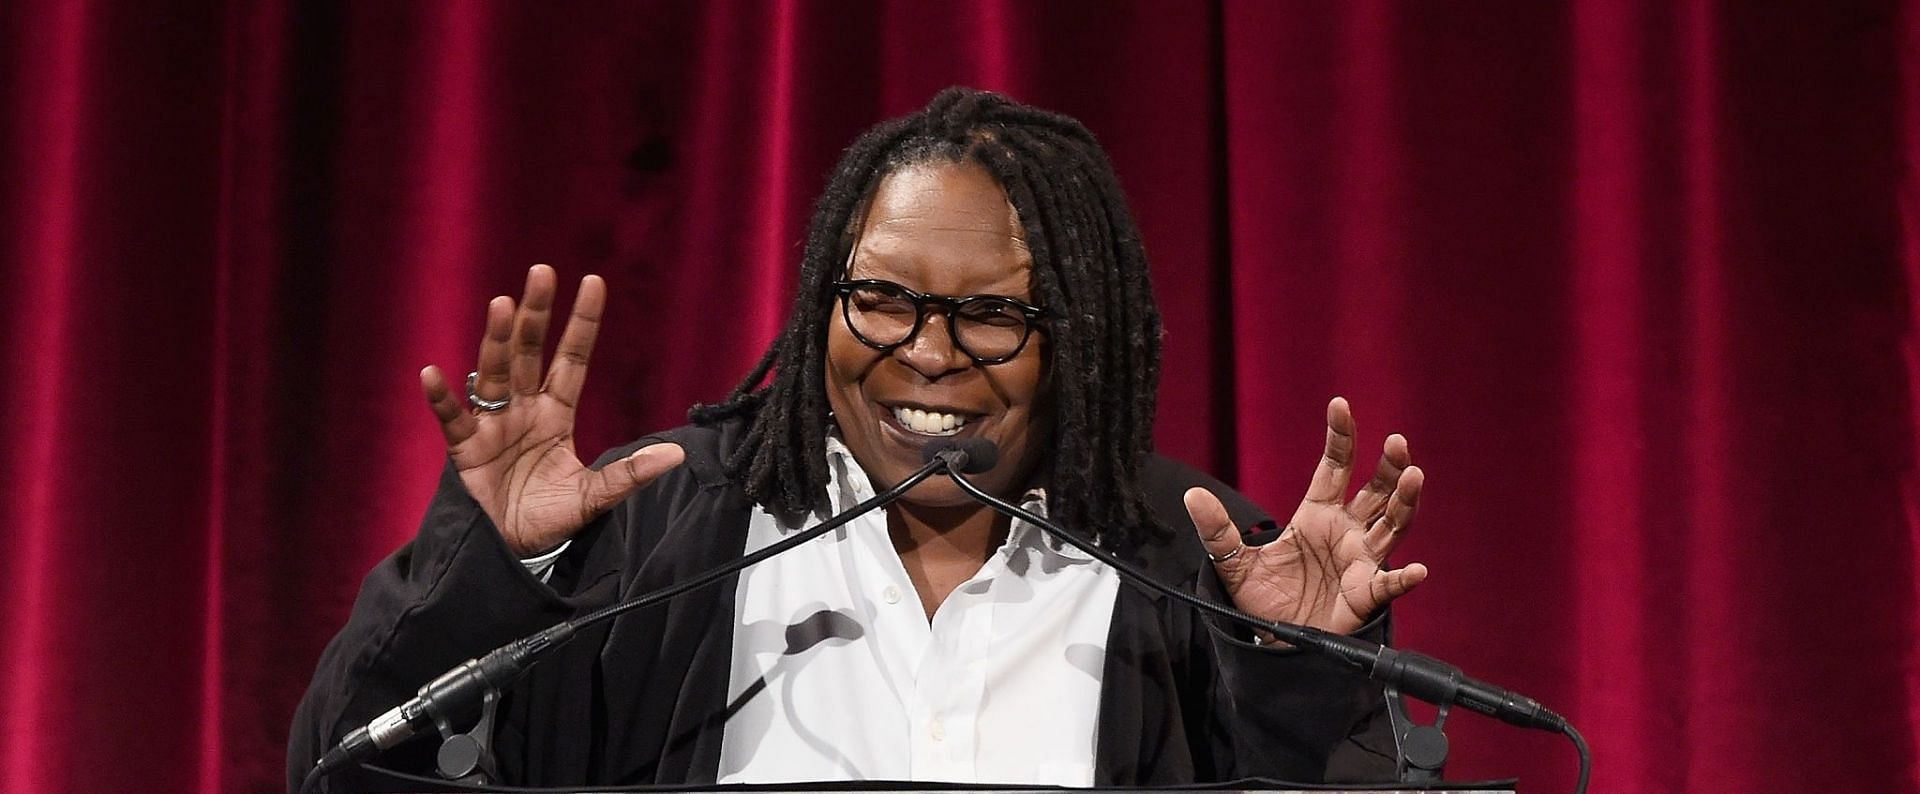 Whoopi Goldberg recently came under fire for saying the Holocaust was &quot;not about race.&quot; (Image via Jamie McCarthy/Getty Images)